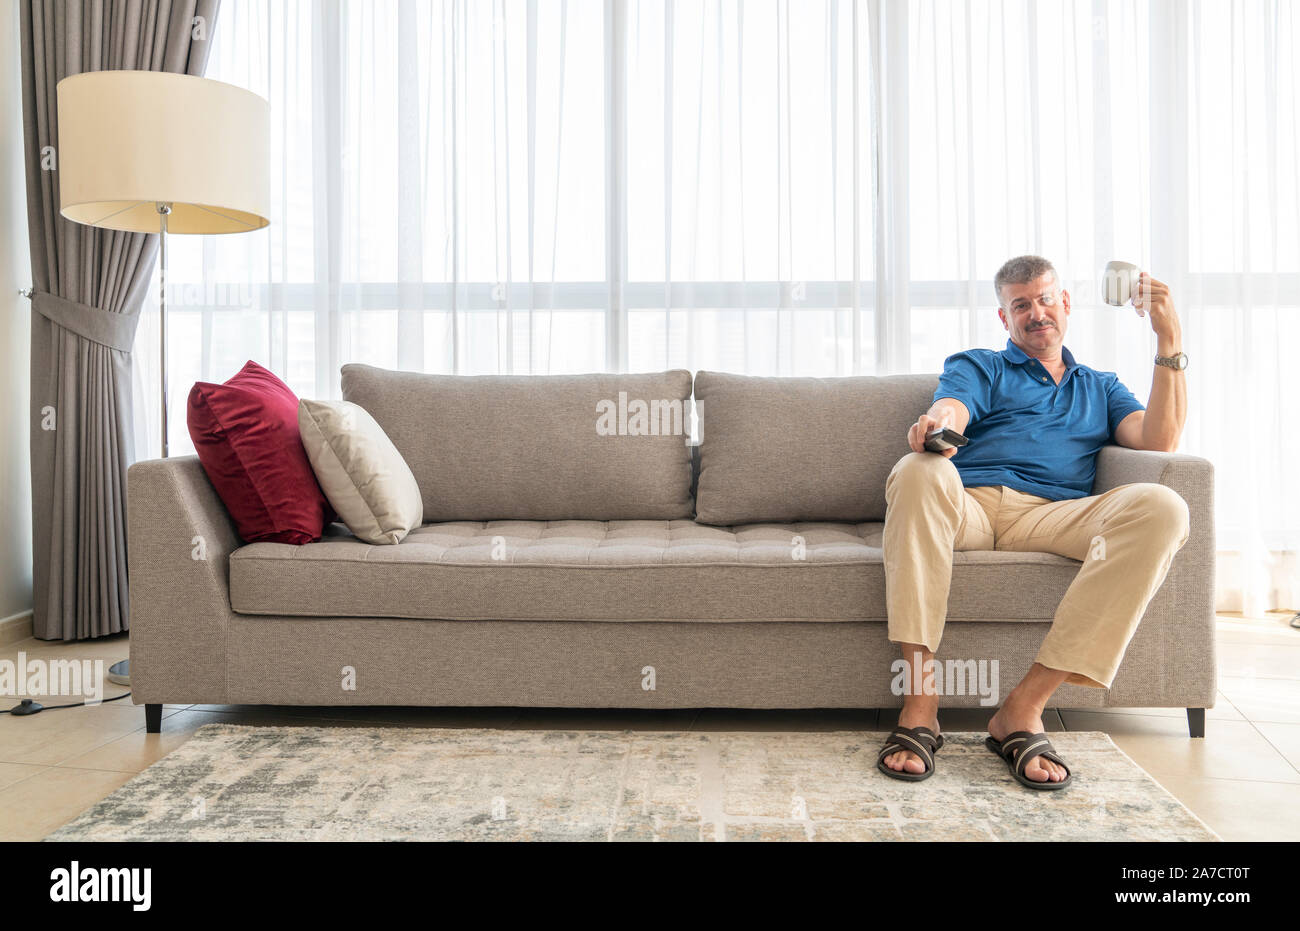 middle aged man sitting on a sofa and watching TV Stock Photo